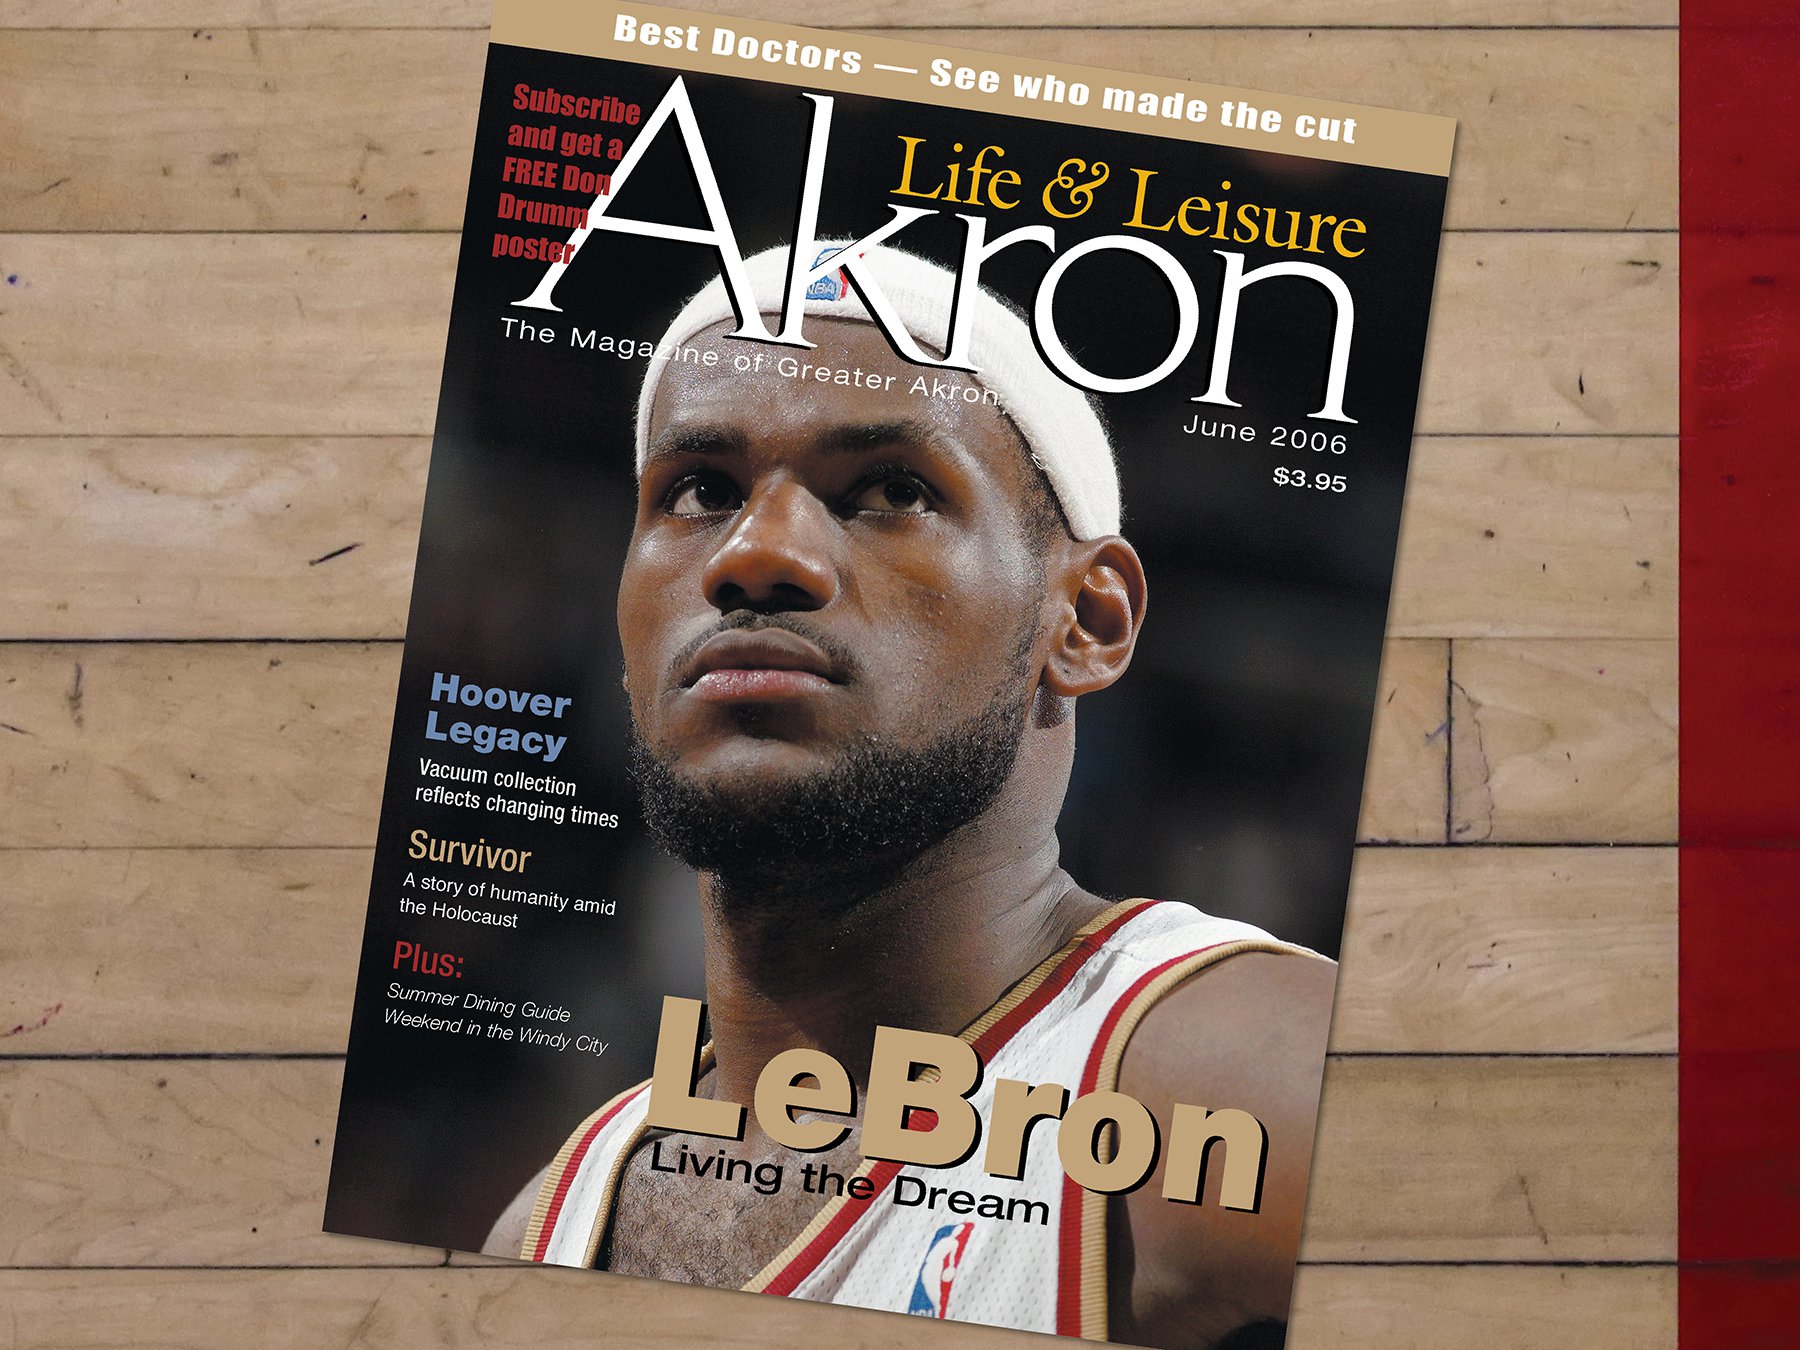 Check out this old LeBron James ad from 2006! Found in a magazine